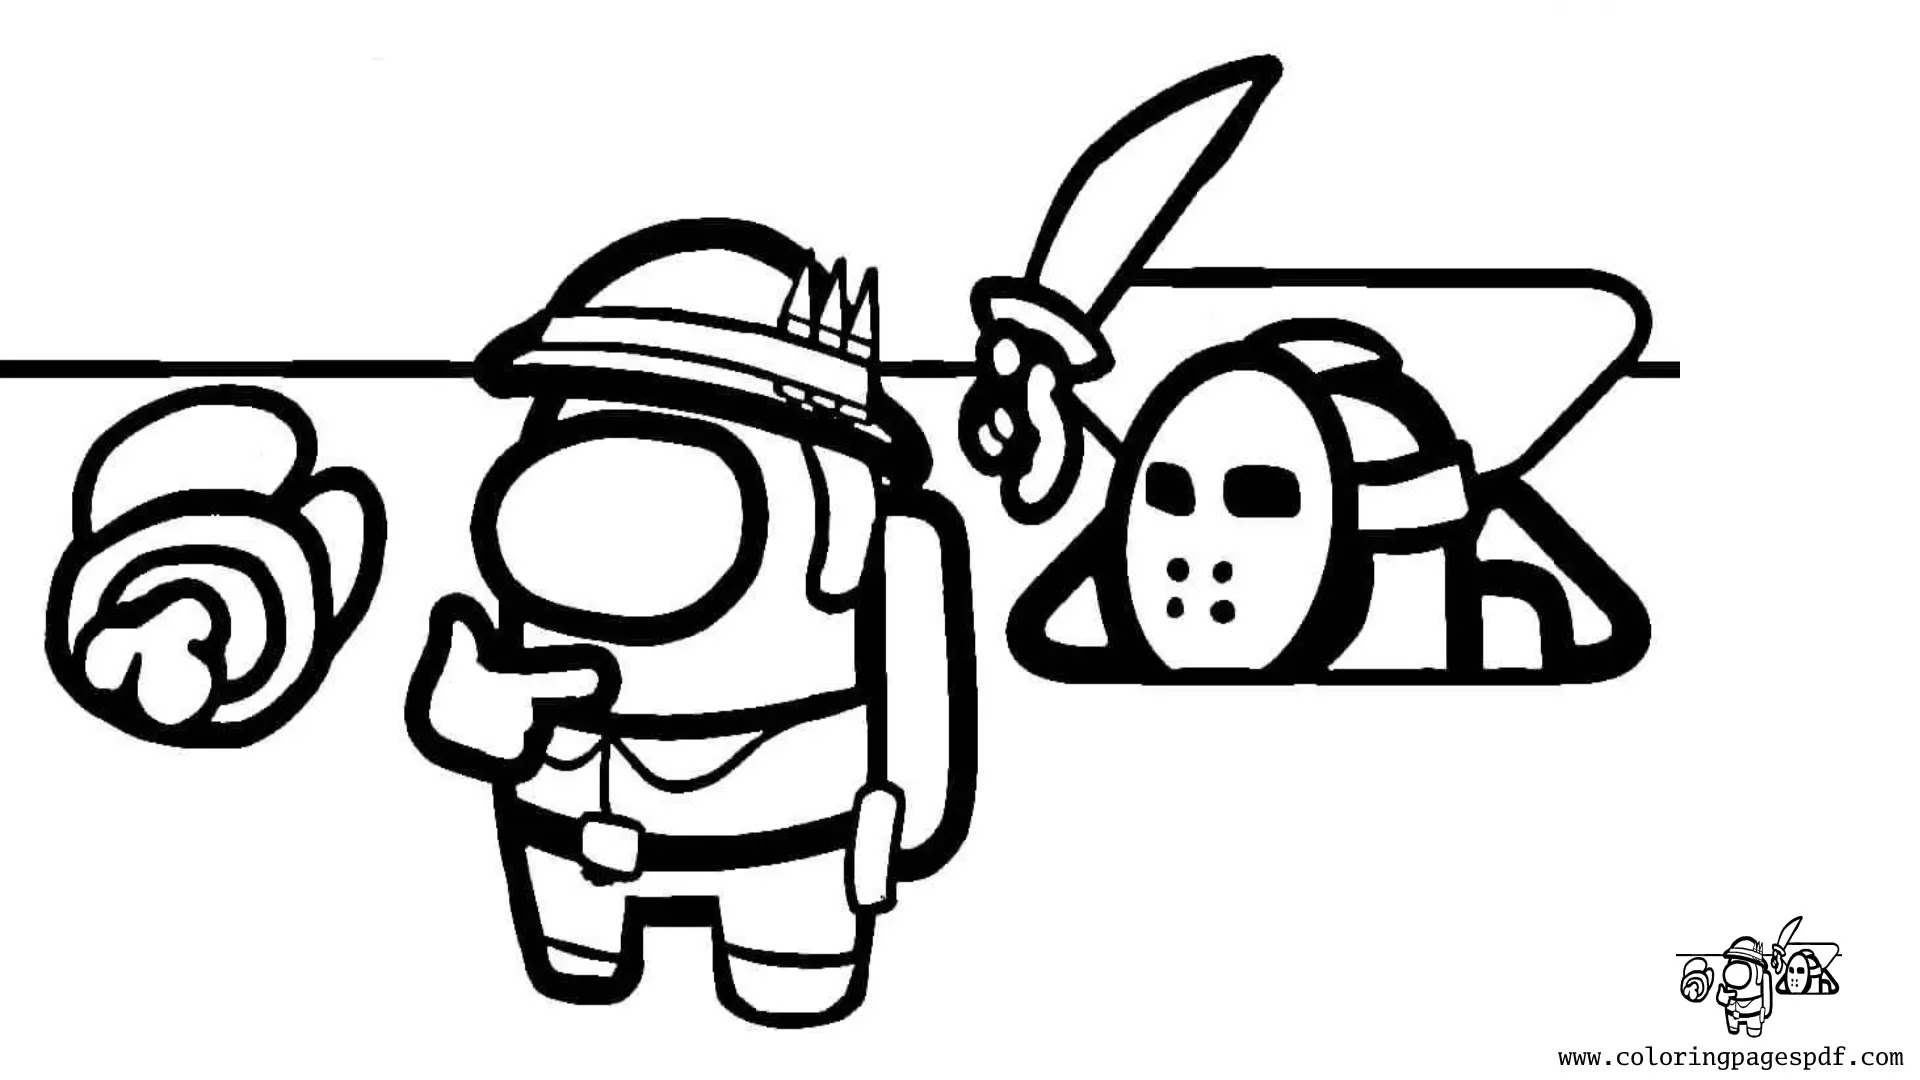 Coloring Page Of An Imposter About To Kill A Crewmate